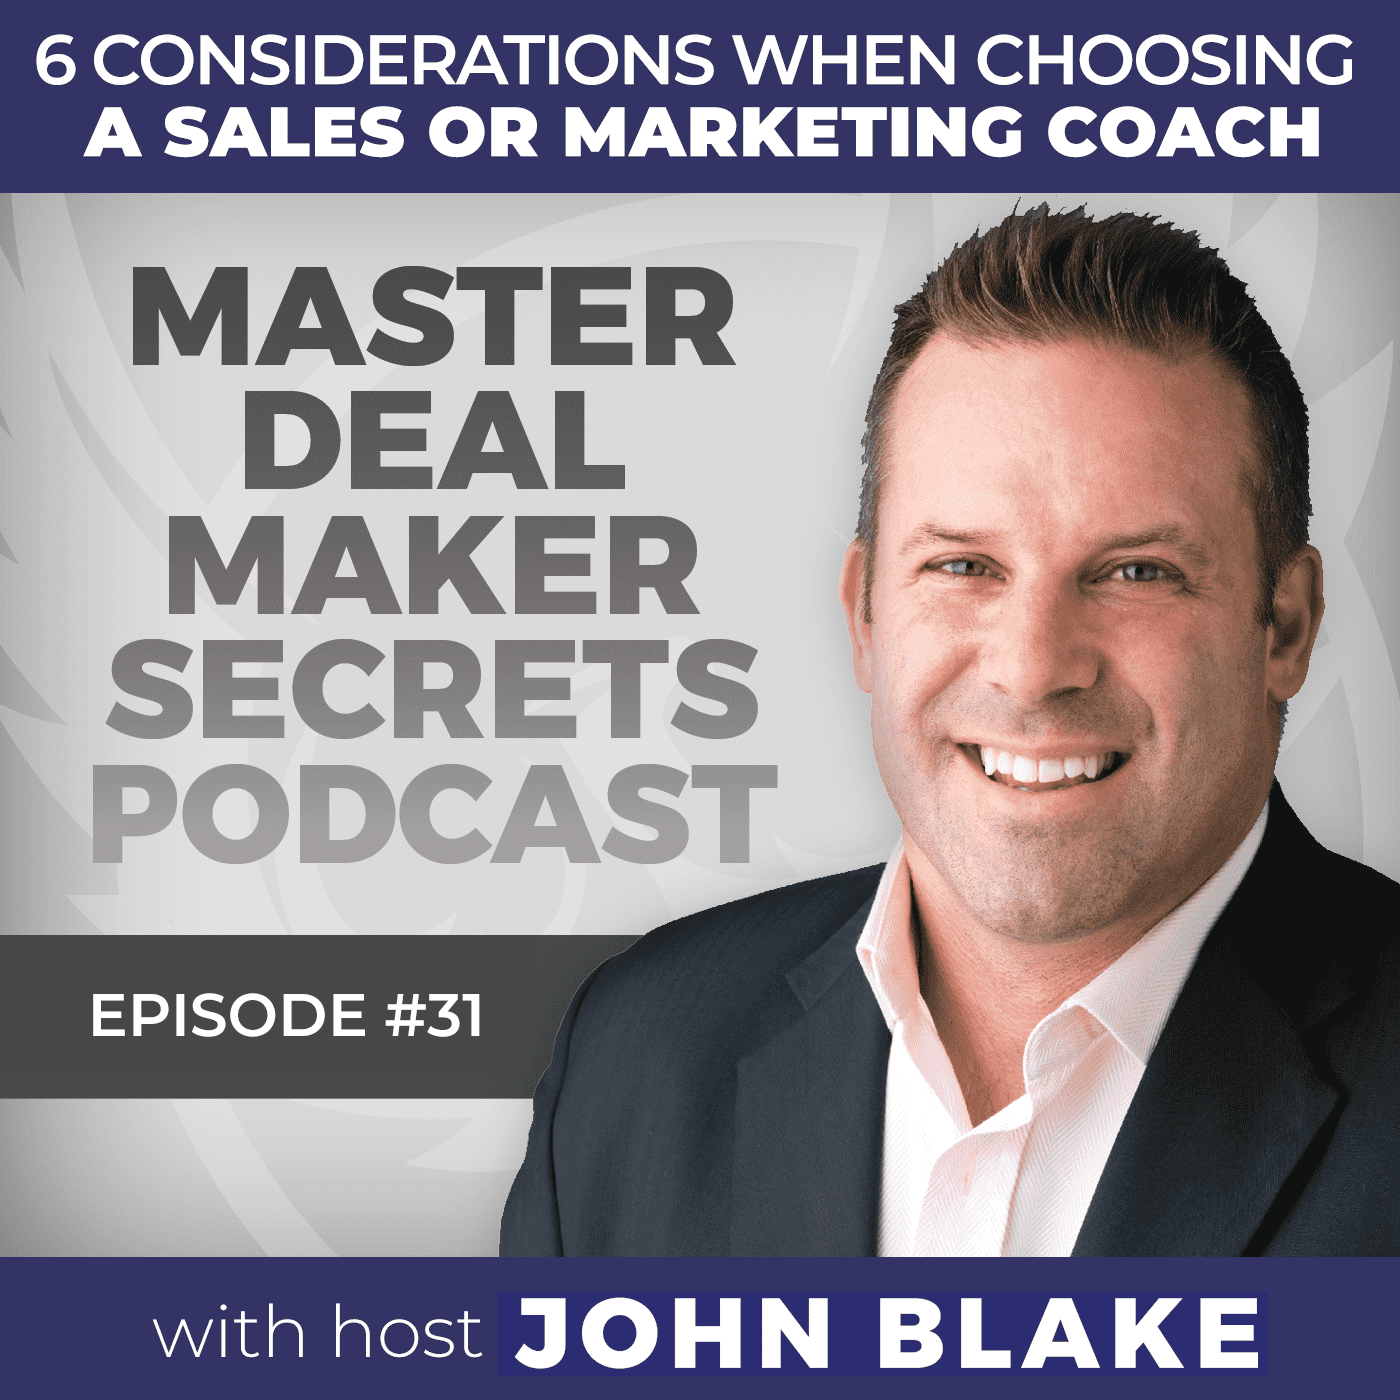 6 considerations when choosing a sales or marketing coach with John Blake